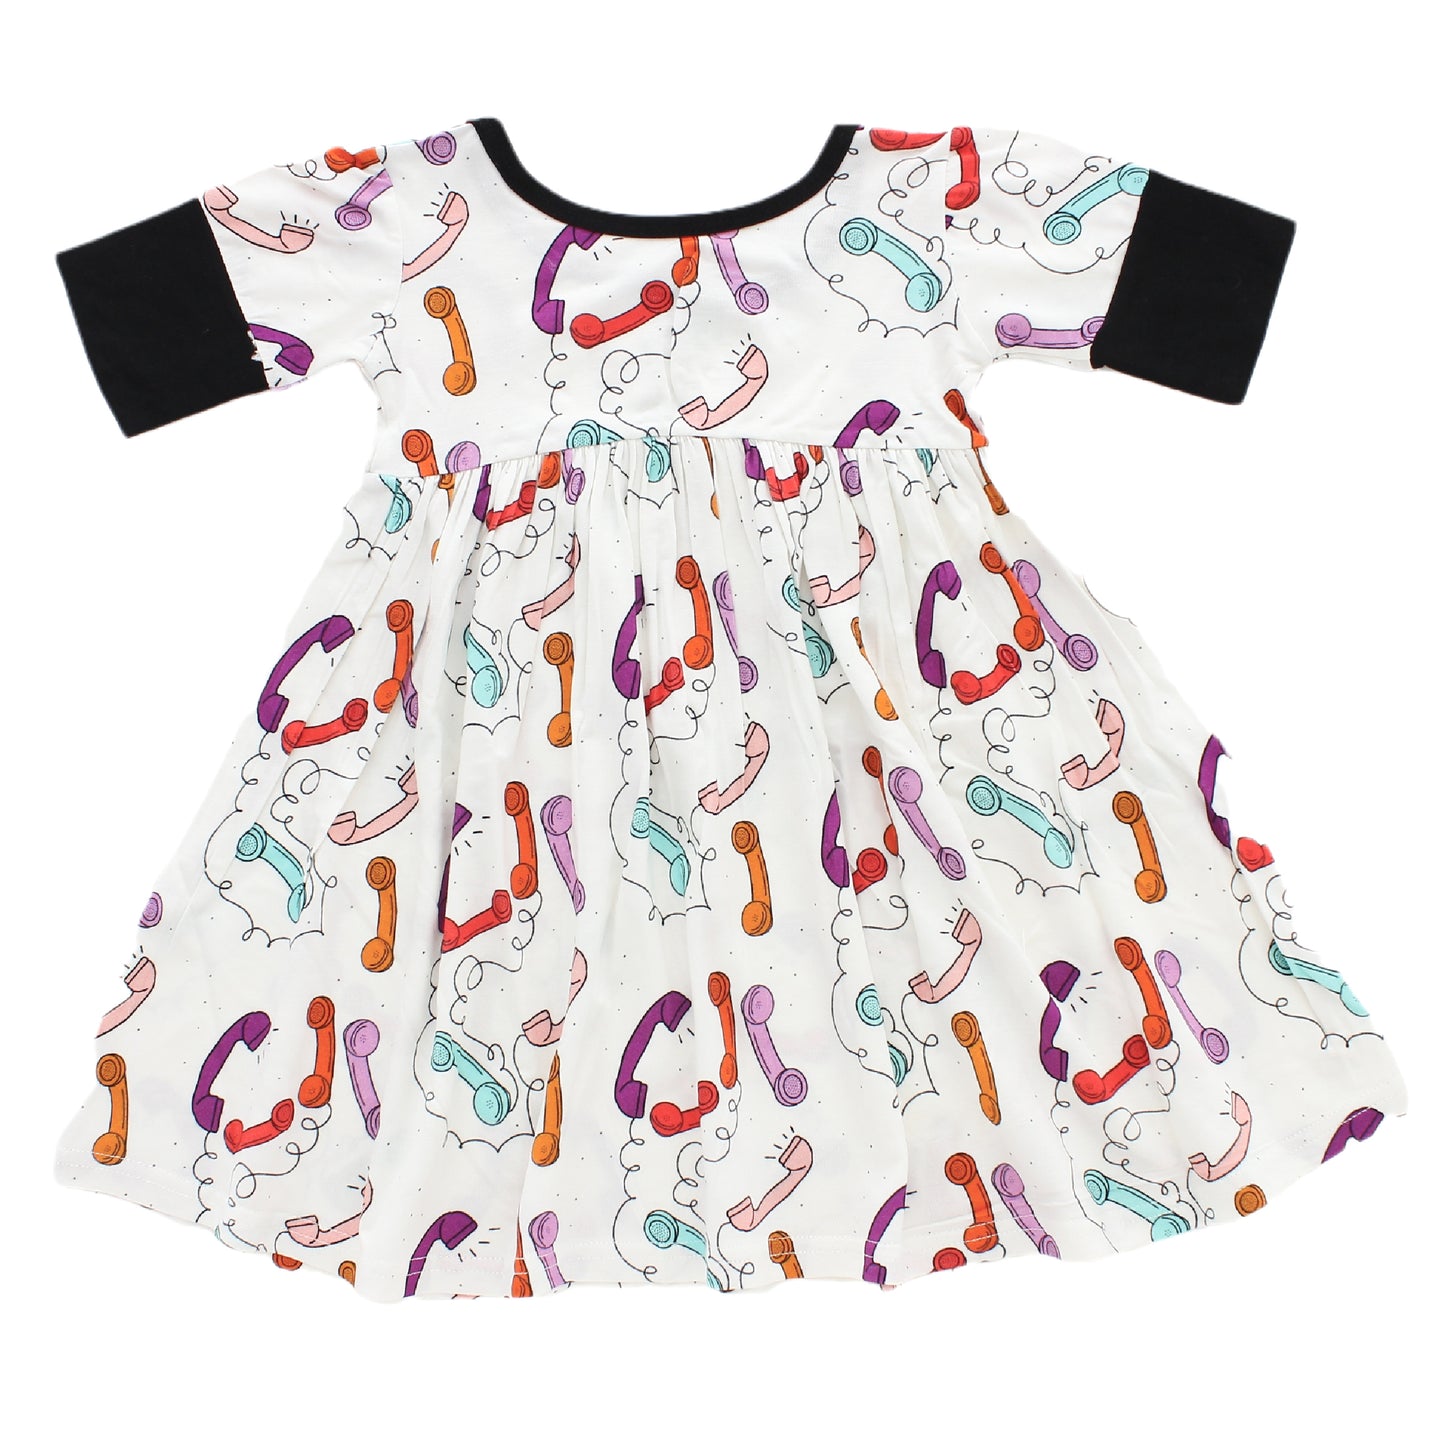 A soft bamboo dress featuring pink, purple, orange and blue telephones with black trim.